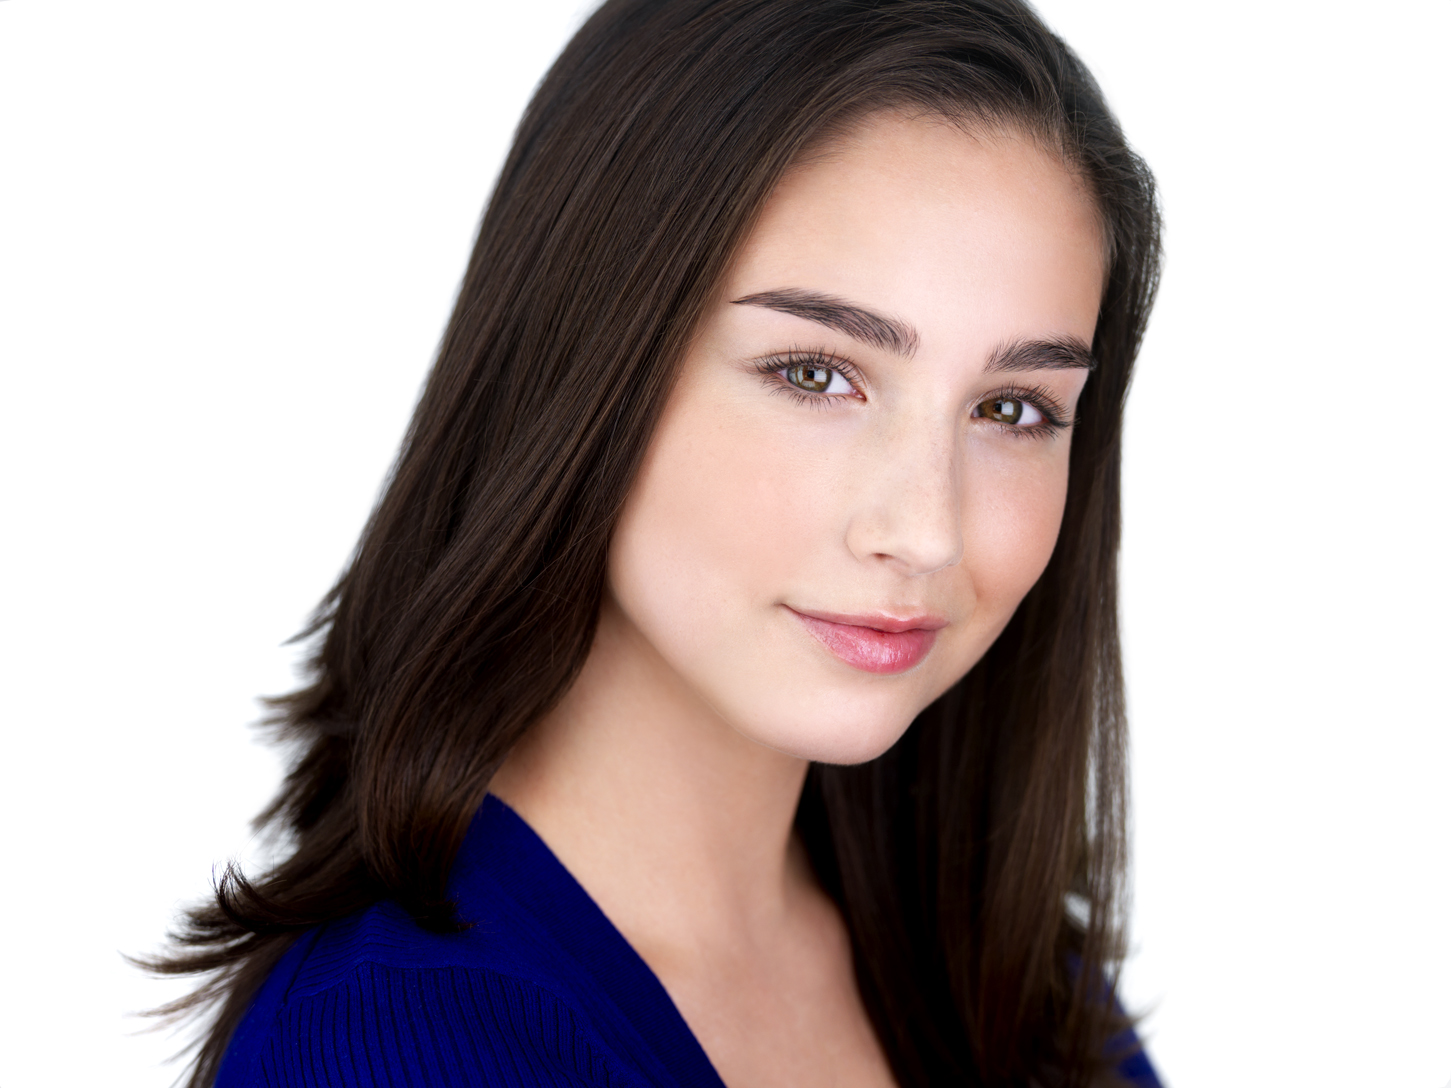 Molly Ephraim Wiki, Bio, Age, Net Worth, and Other Facts